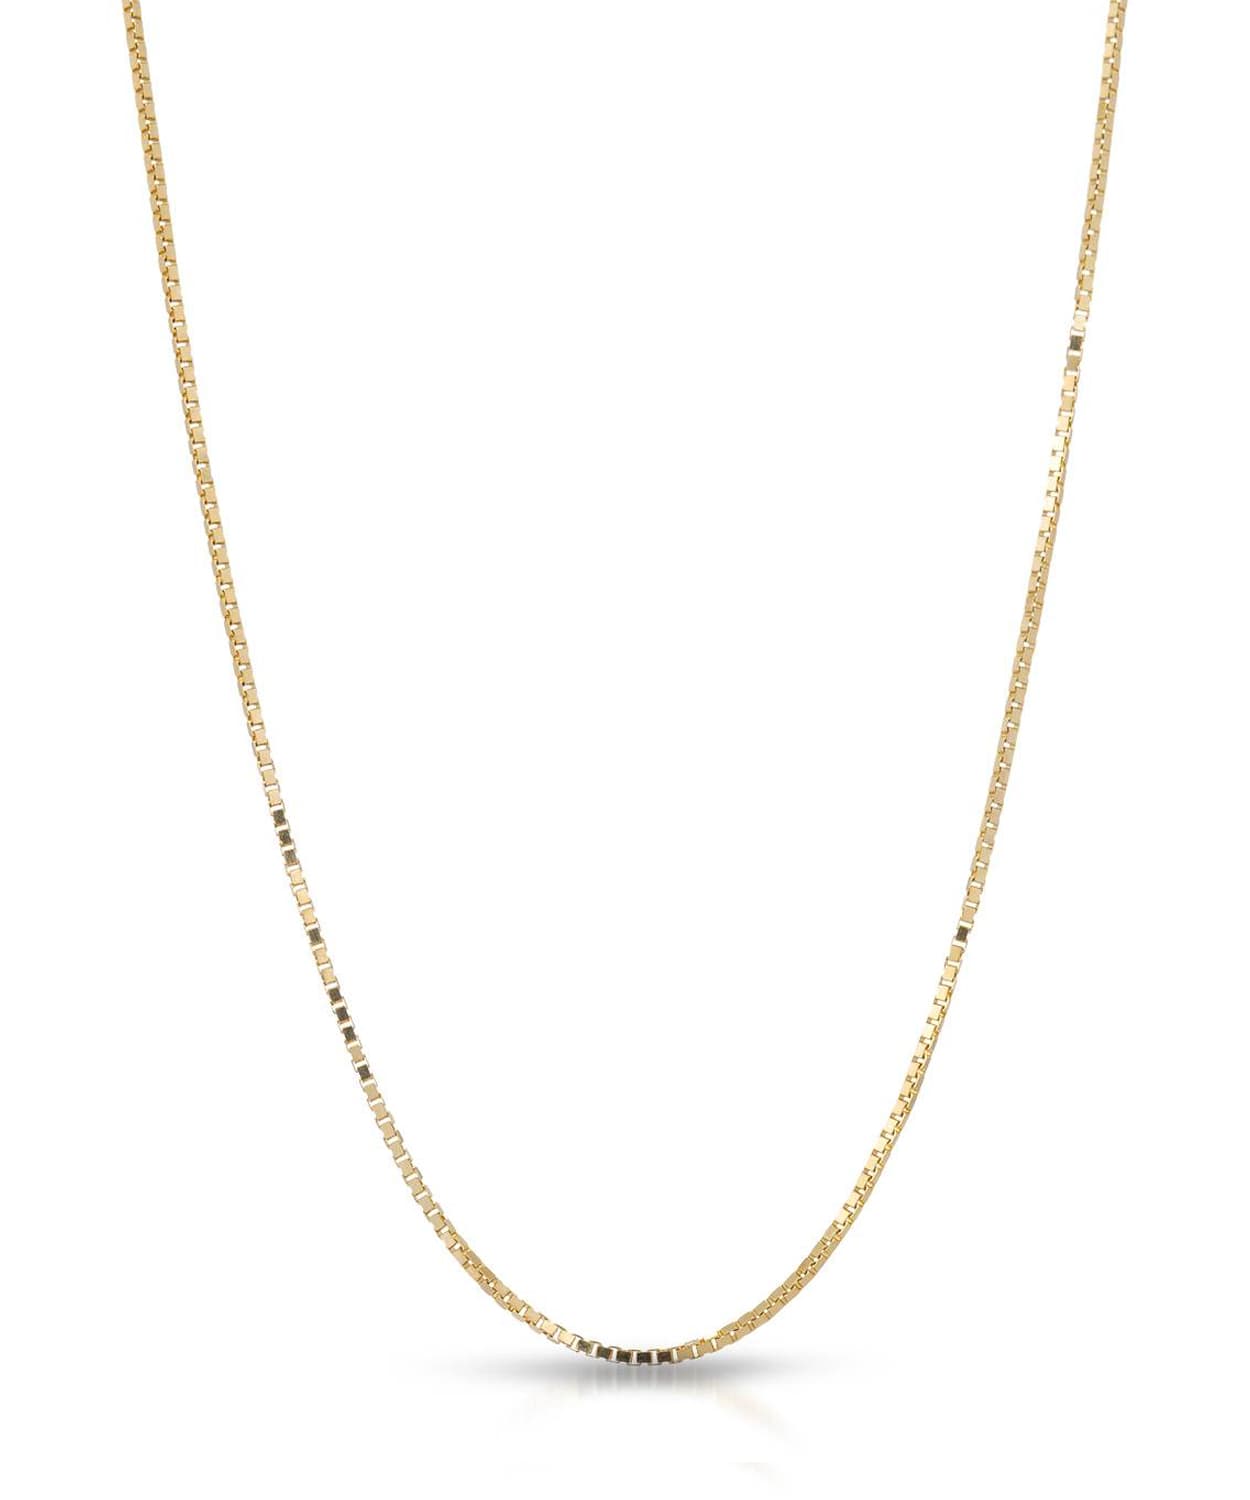 0.7mm 14k Yellow Gold Box Adjustable Chain View 1